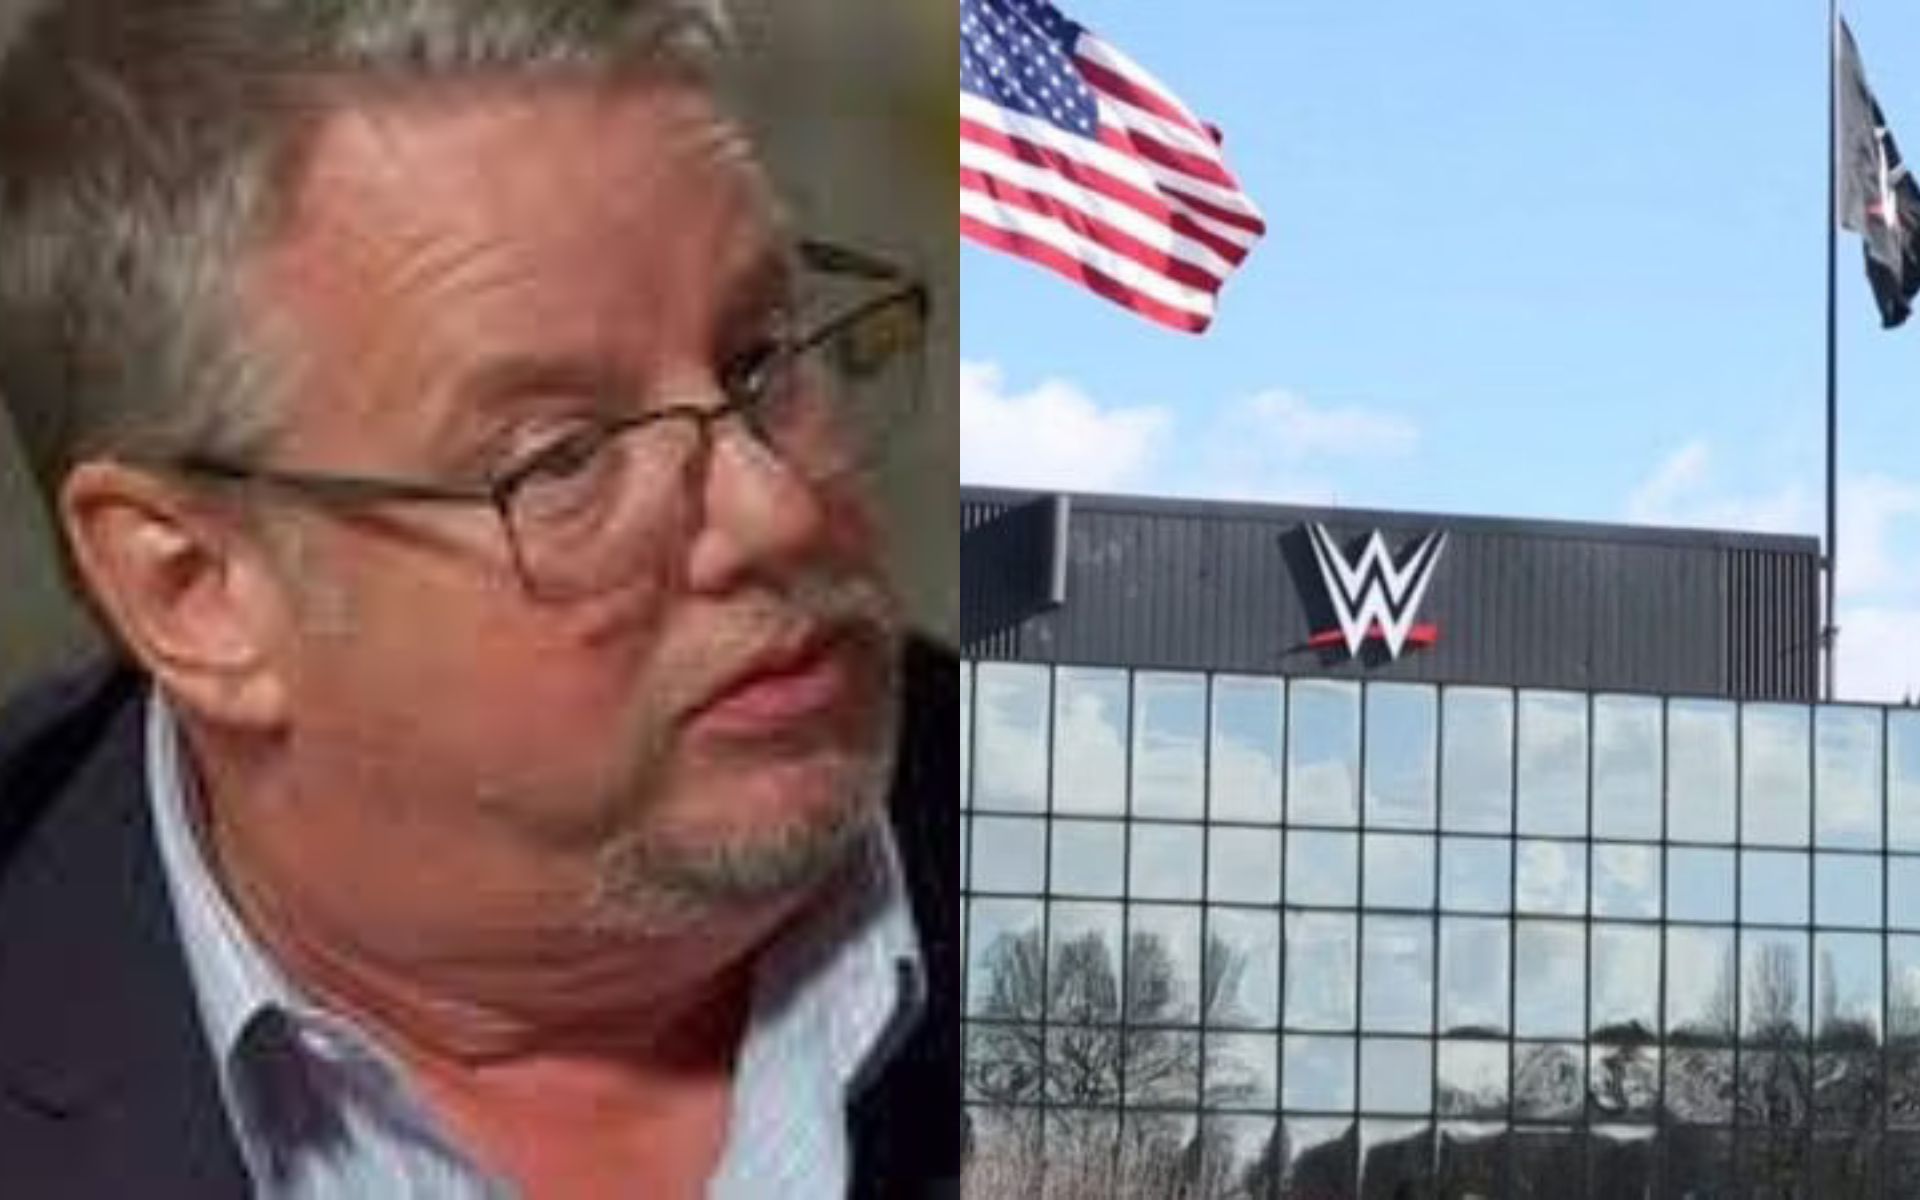 Bruce Prichard has been associated with the company for nearly 35 years